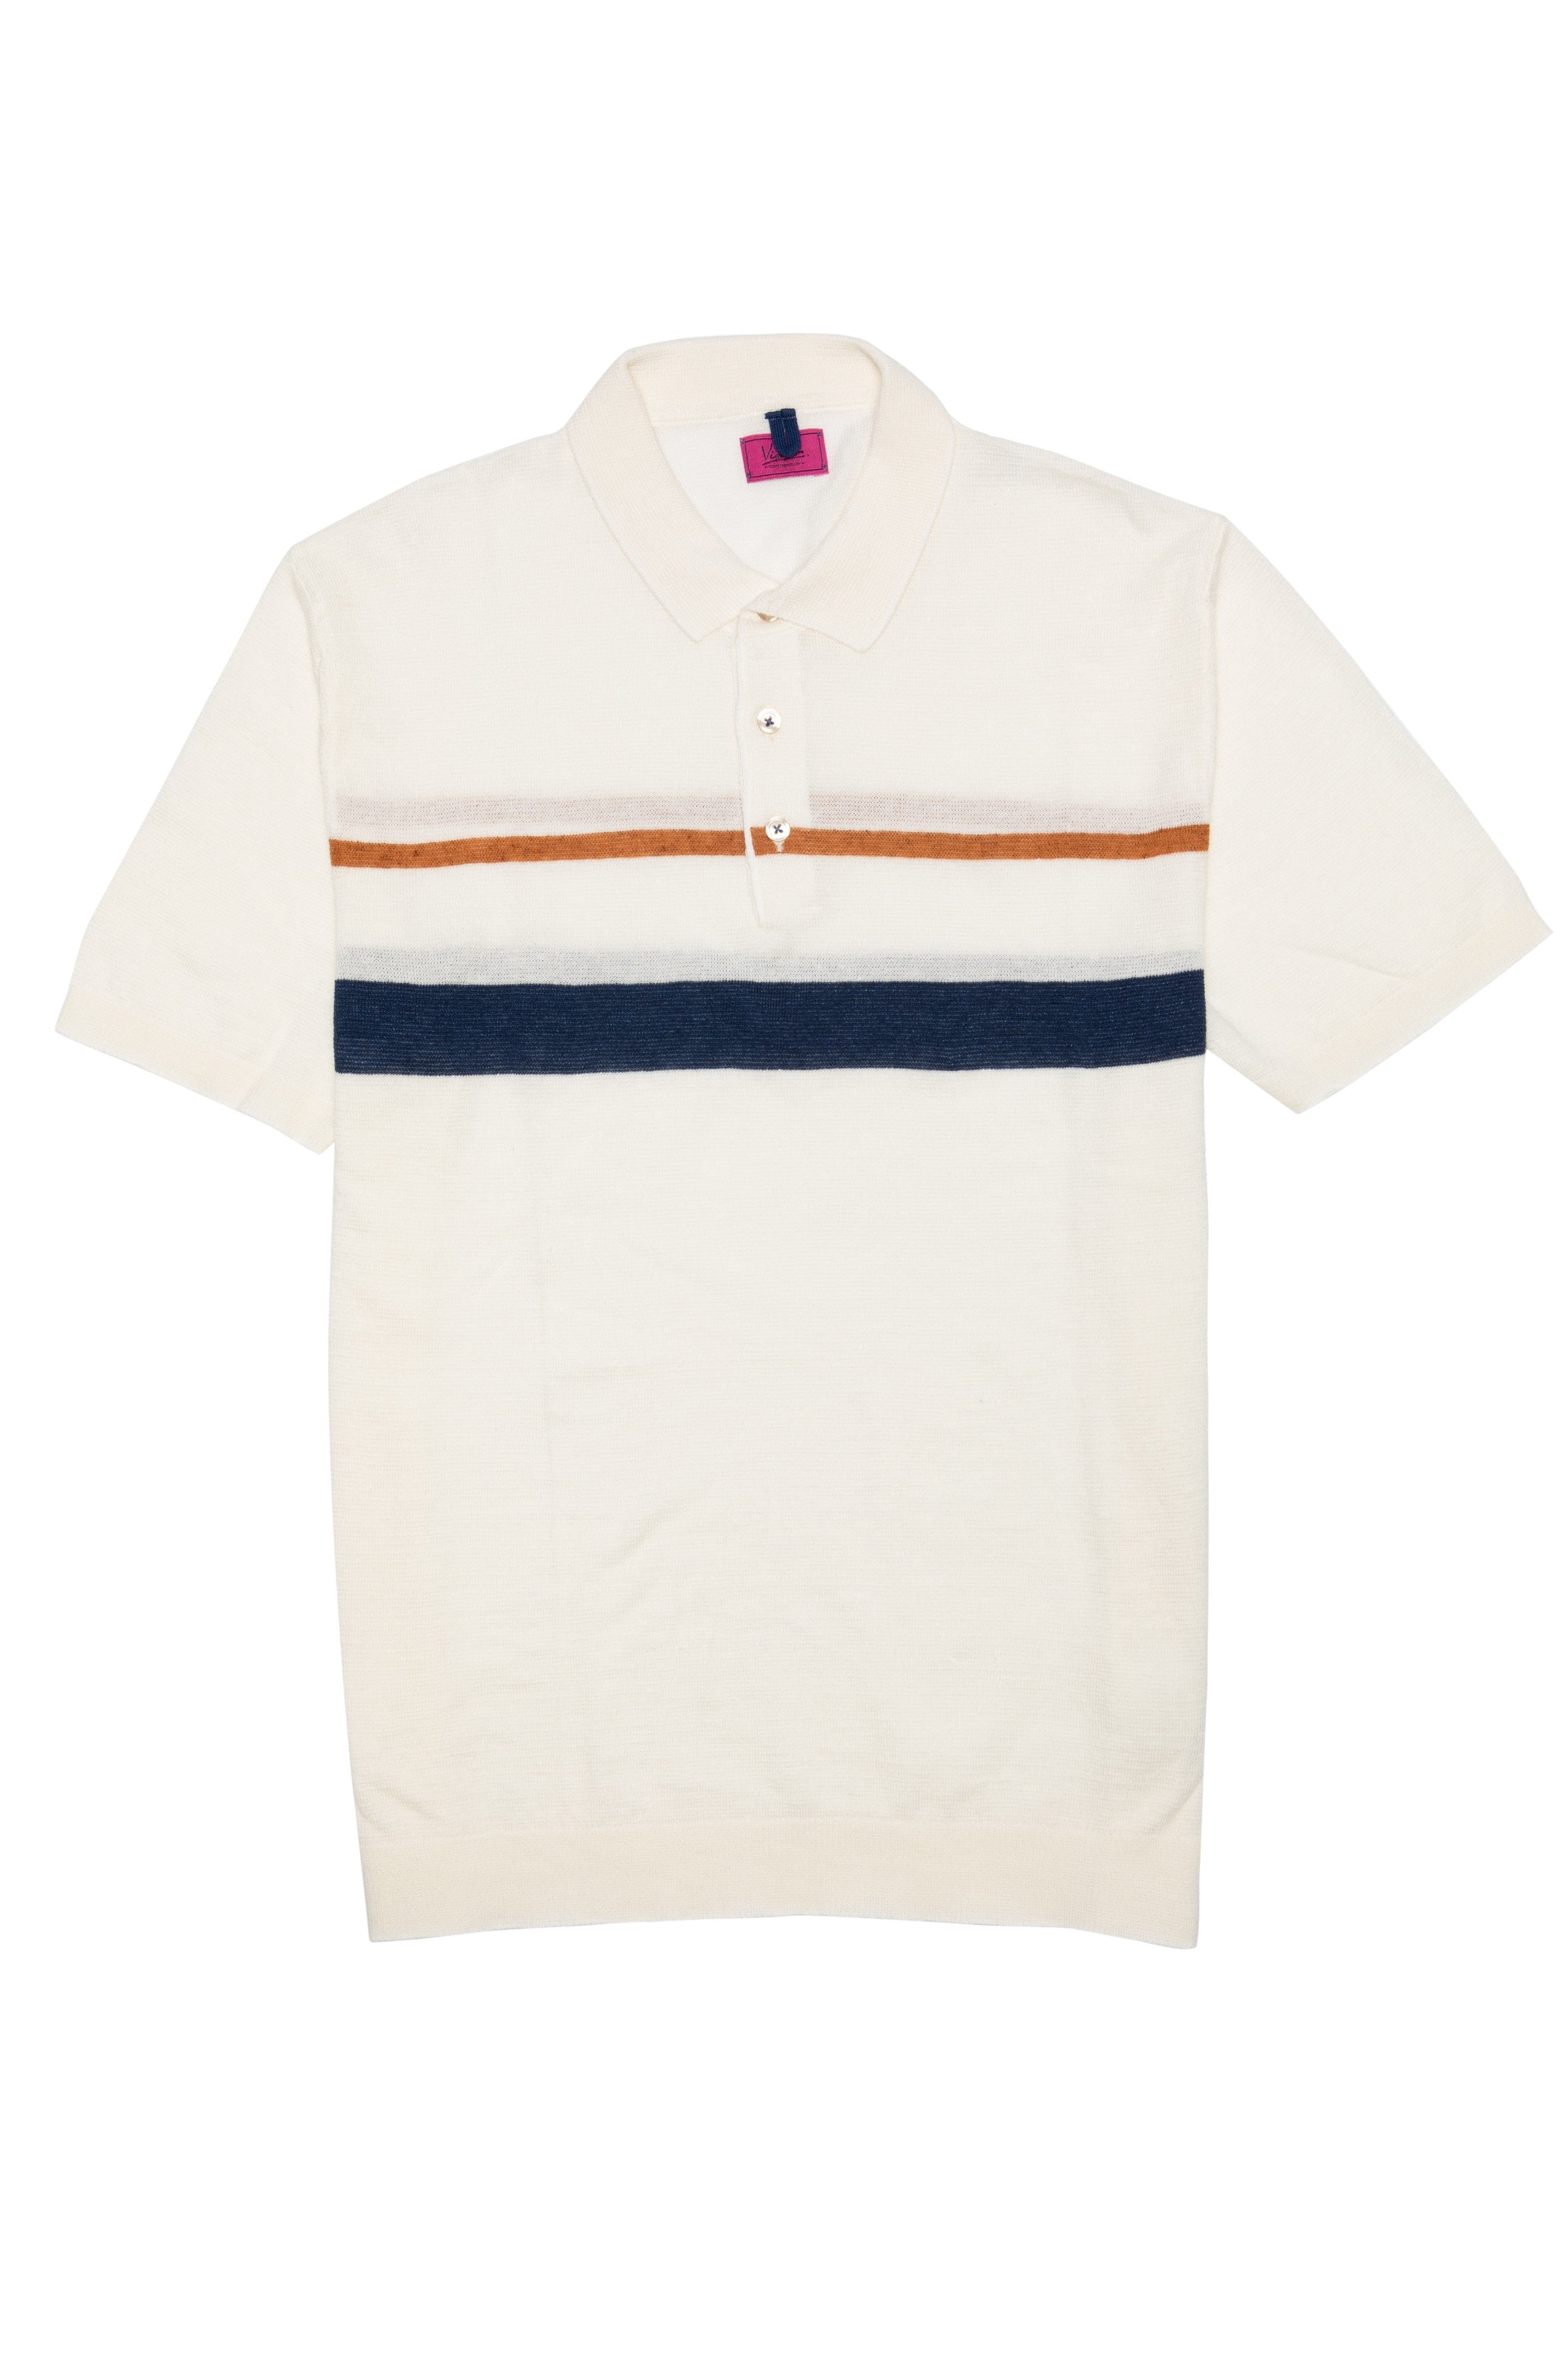 Casual white t-shirt with navy blue and brown stripe and polo collar